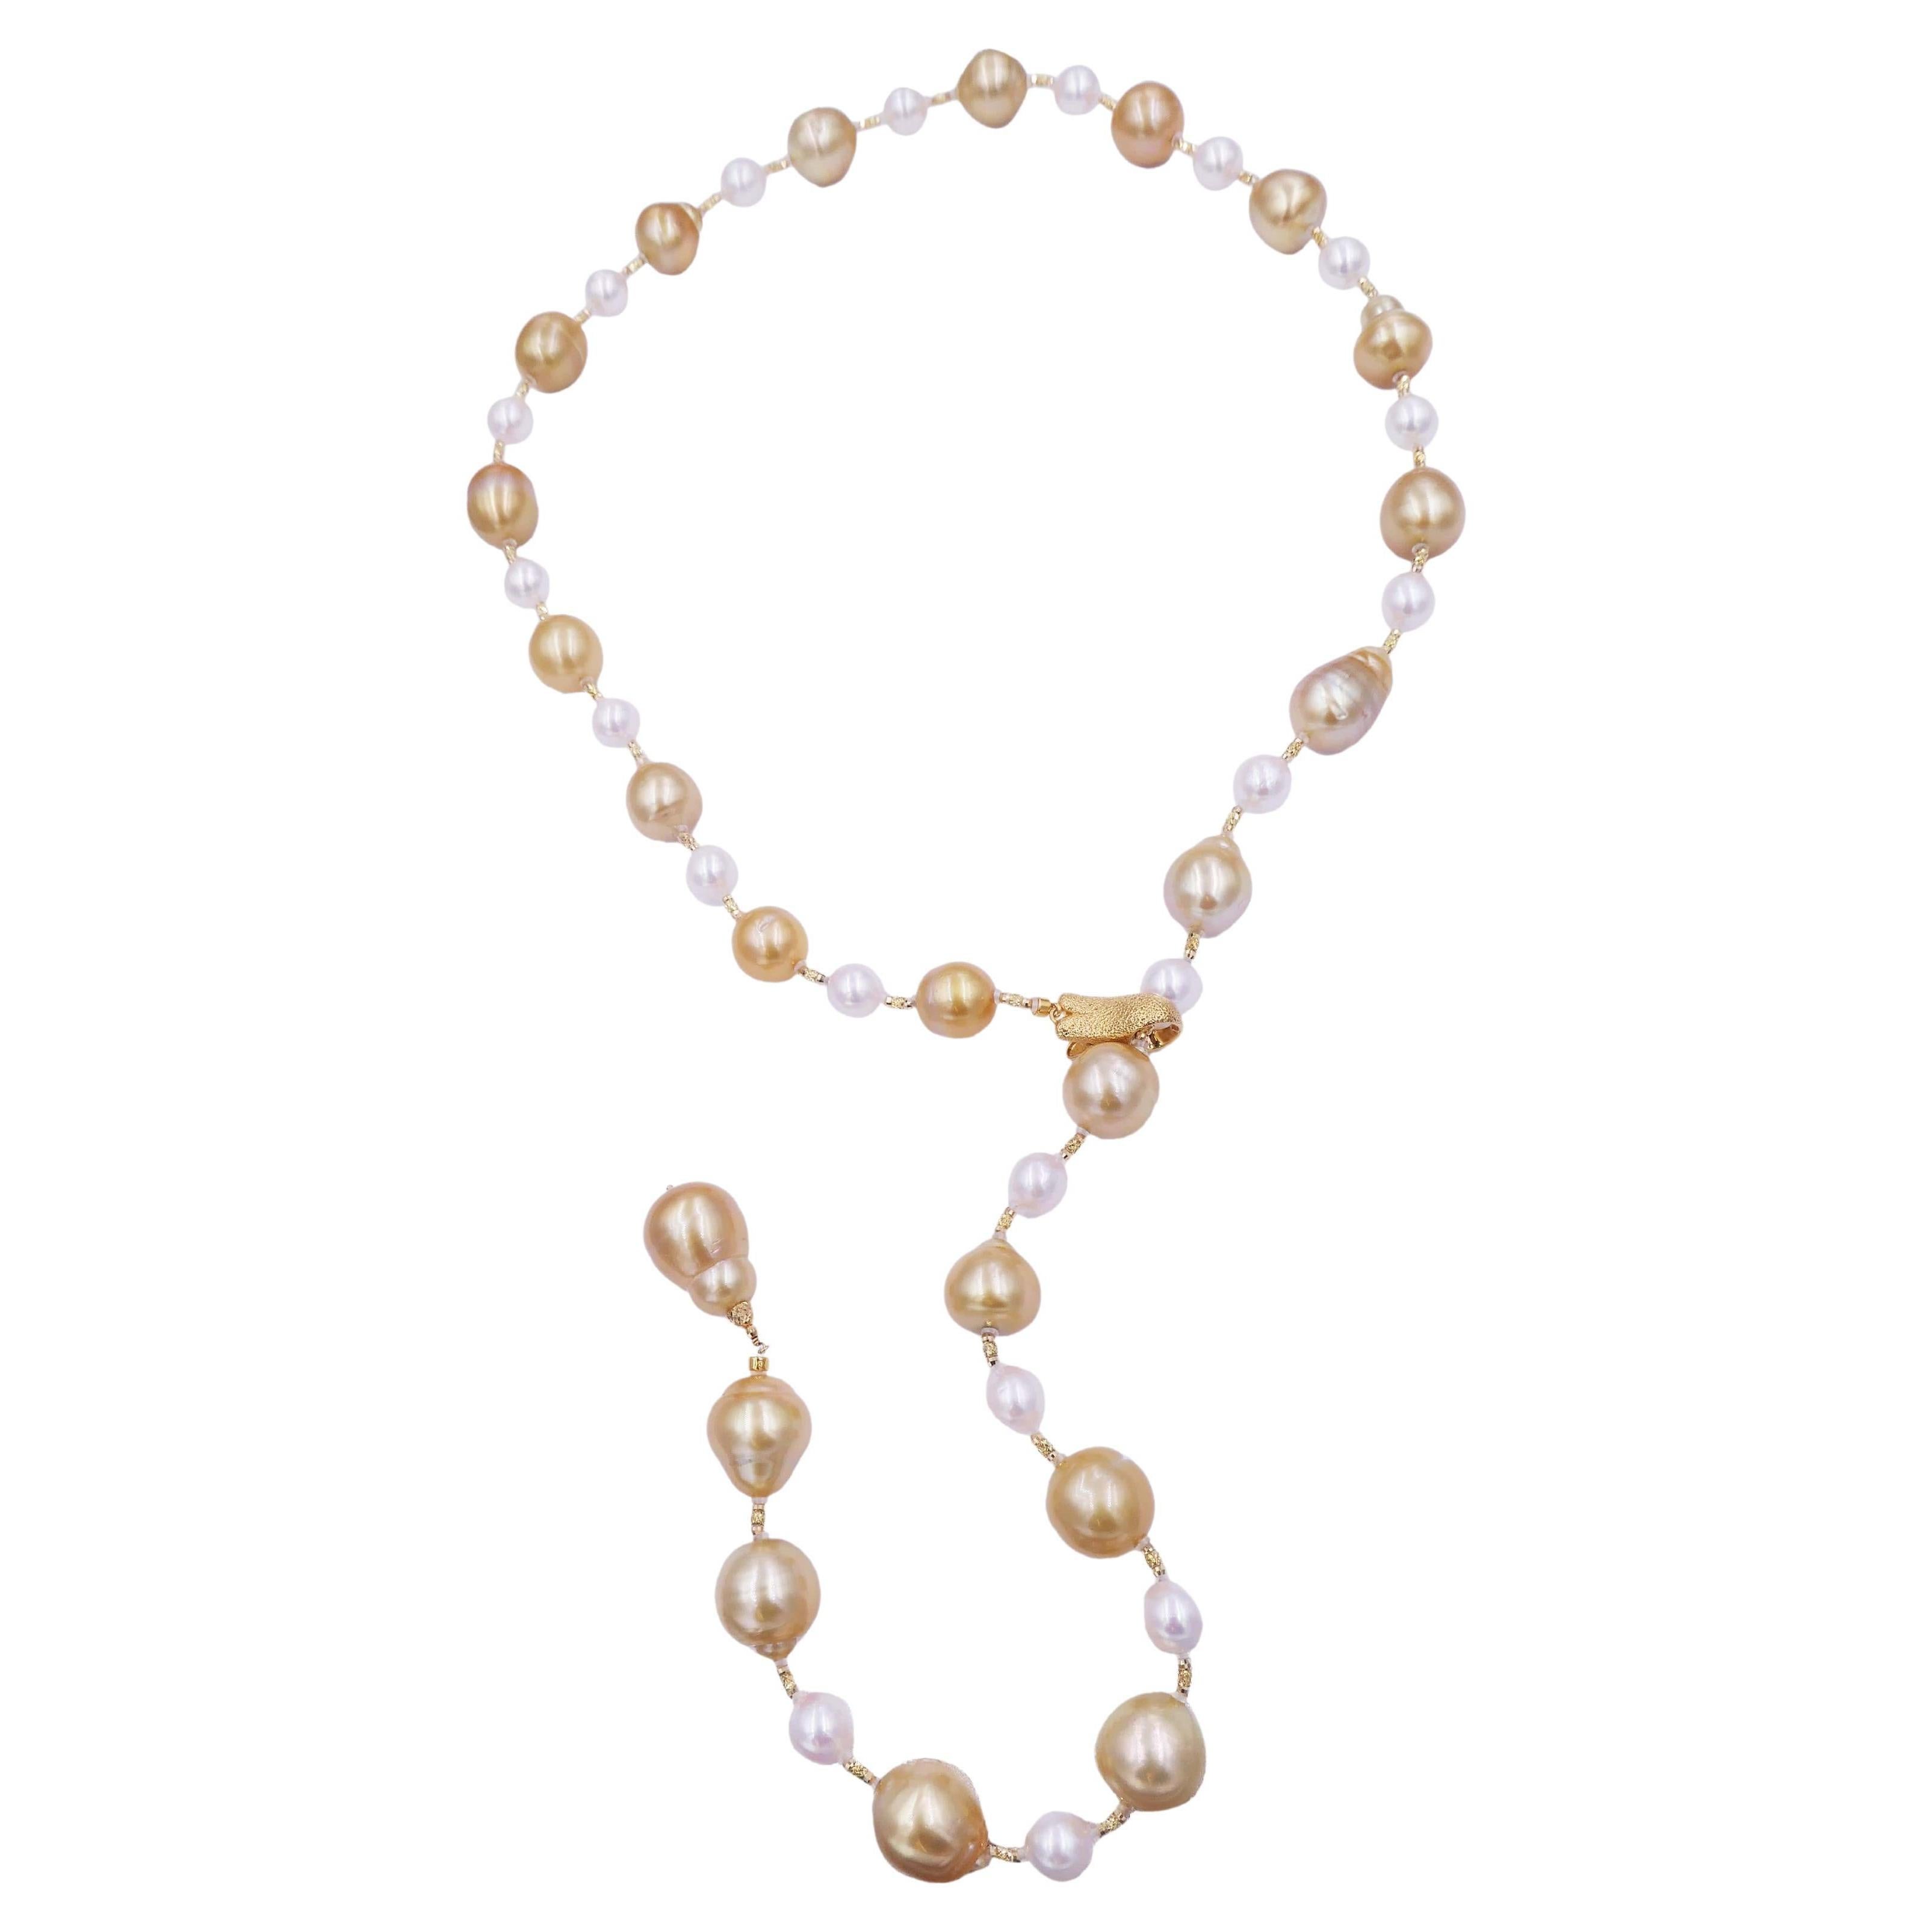 Yellow Golden White South Sea Pearls 18K Gold Adjustable Lariat Clasp Necklace
18 Karat Yellow Gold
South Sea Pearls *Golden & White
AA Quality
Adjustable Length From Choker to 24 inches lariat / clasp can be attached anywhere